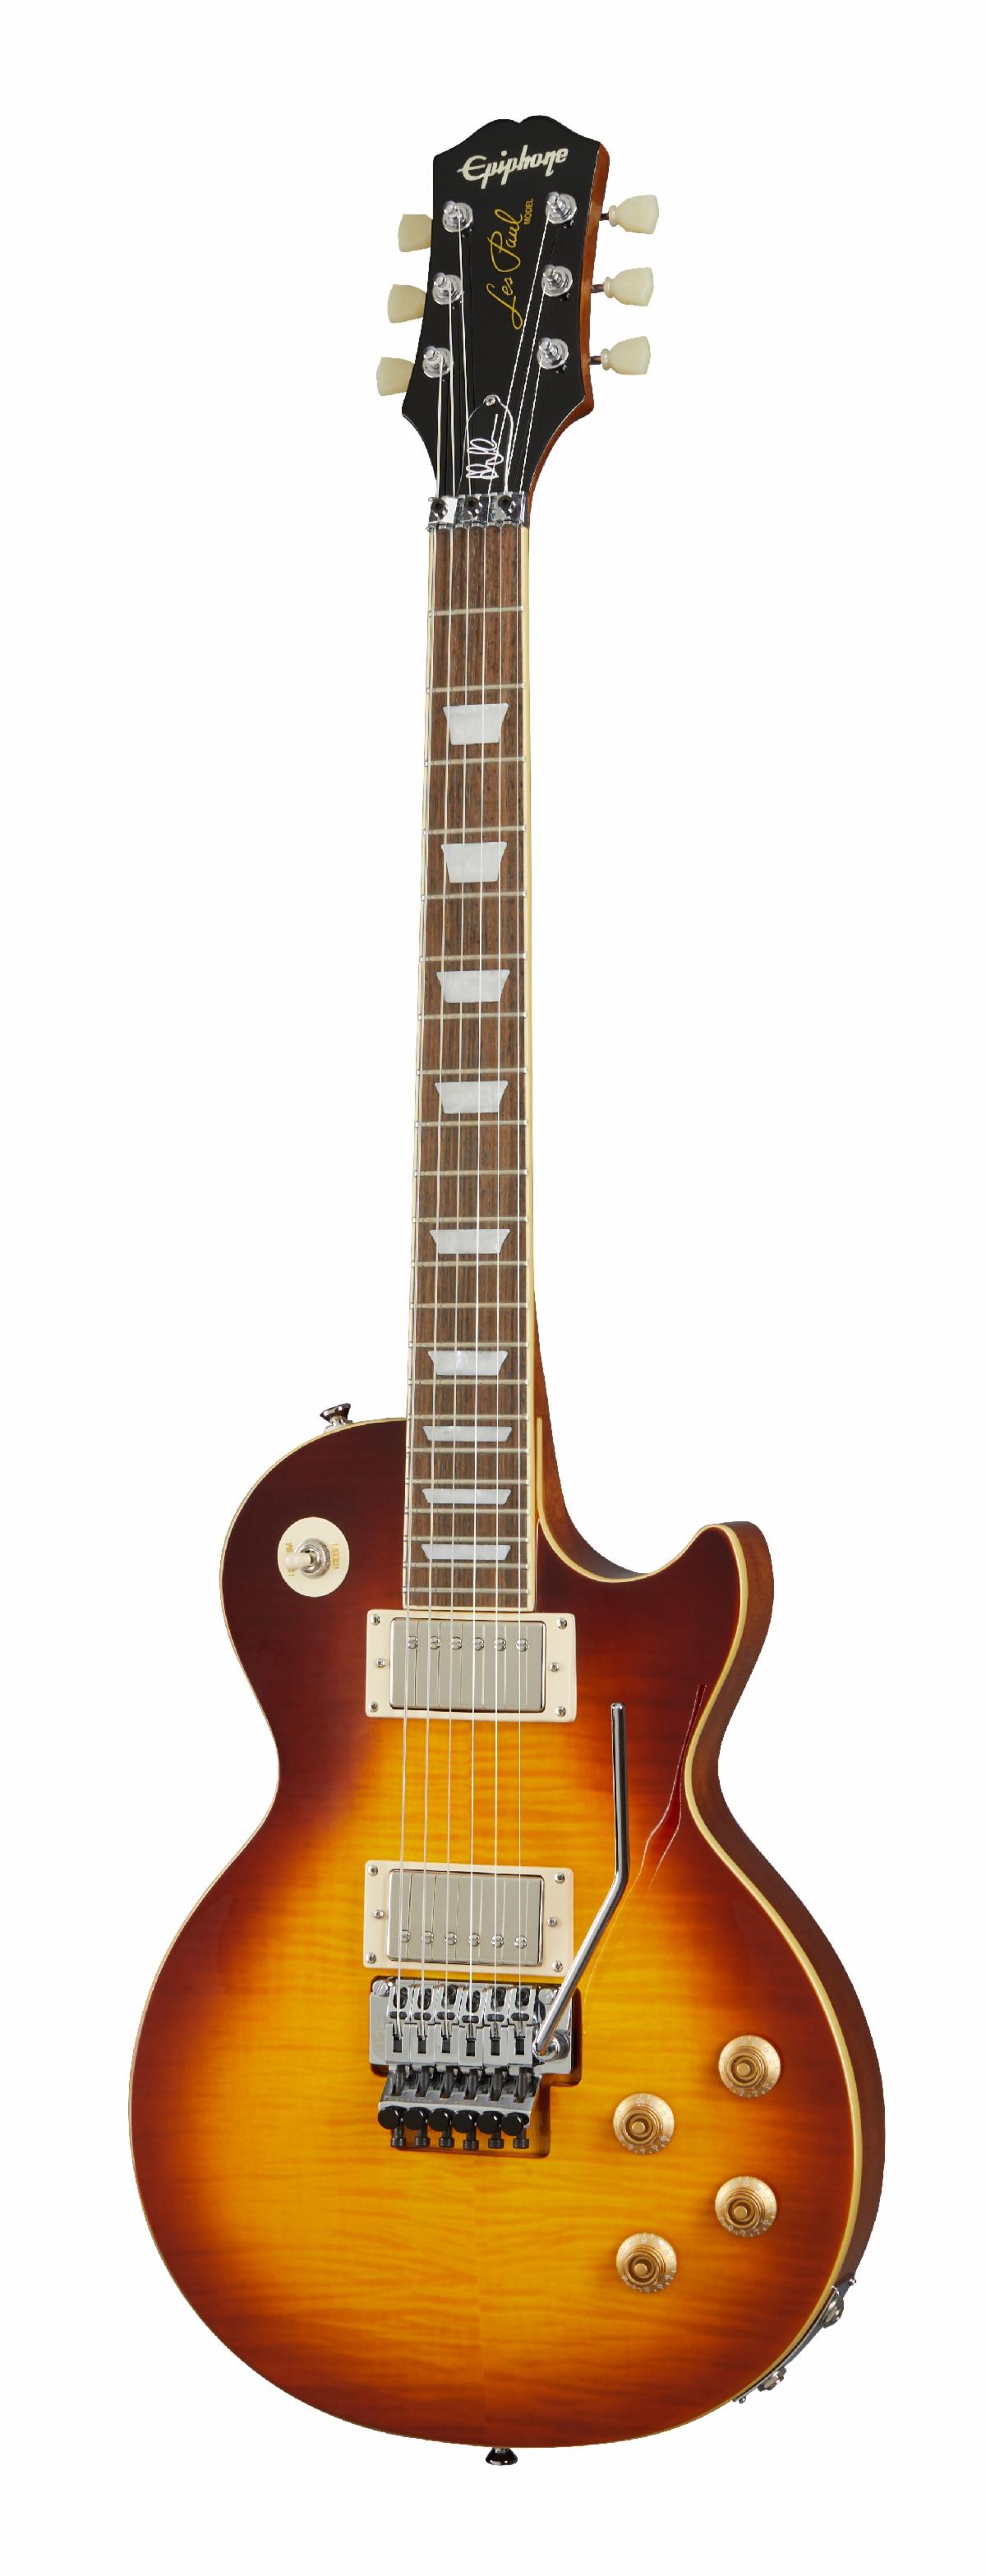  the Alex Lifeson Epiphone Les Paul Standard Axcess.